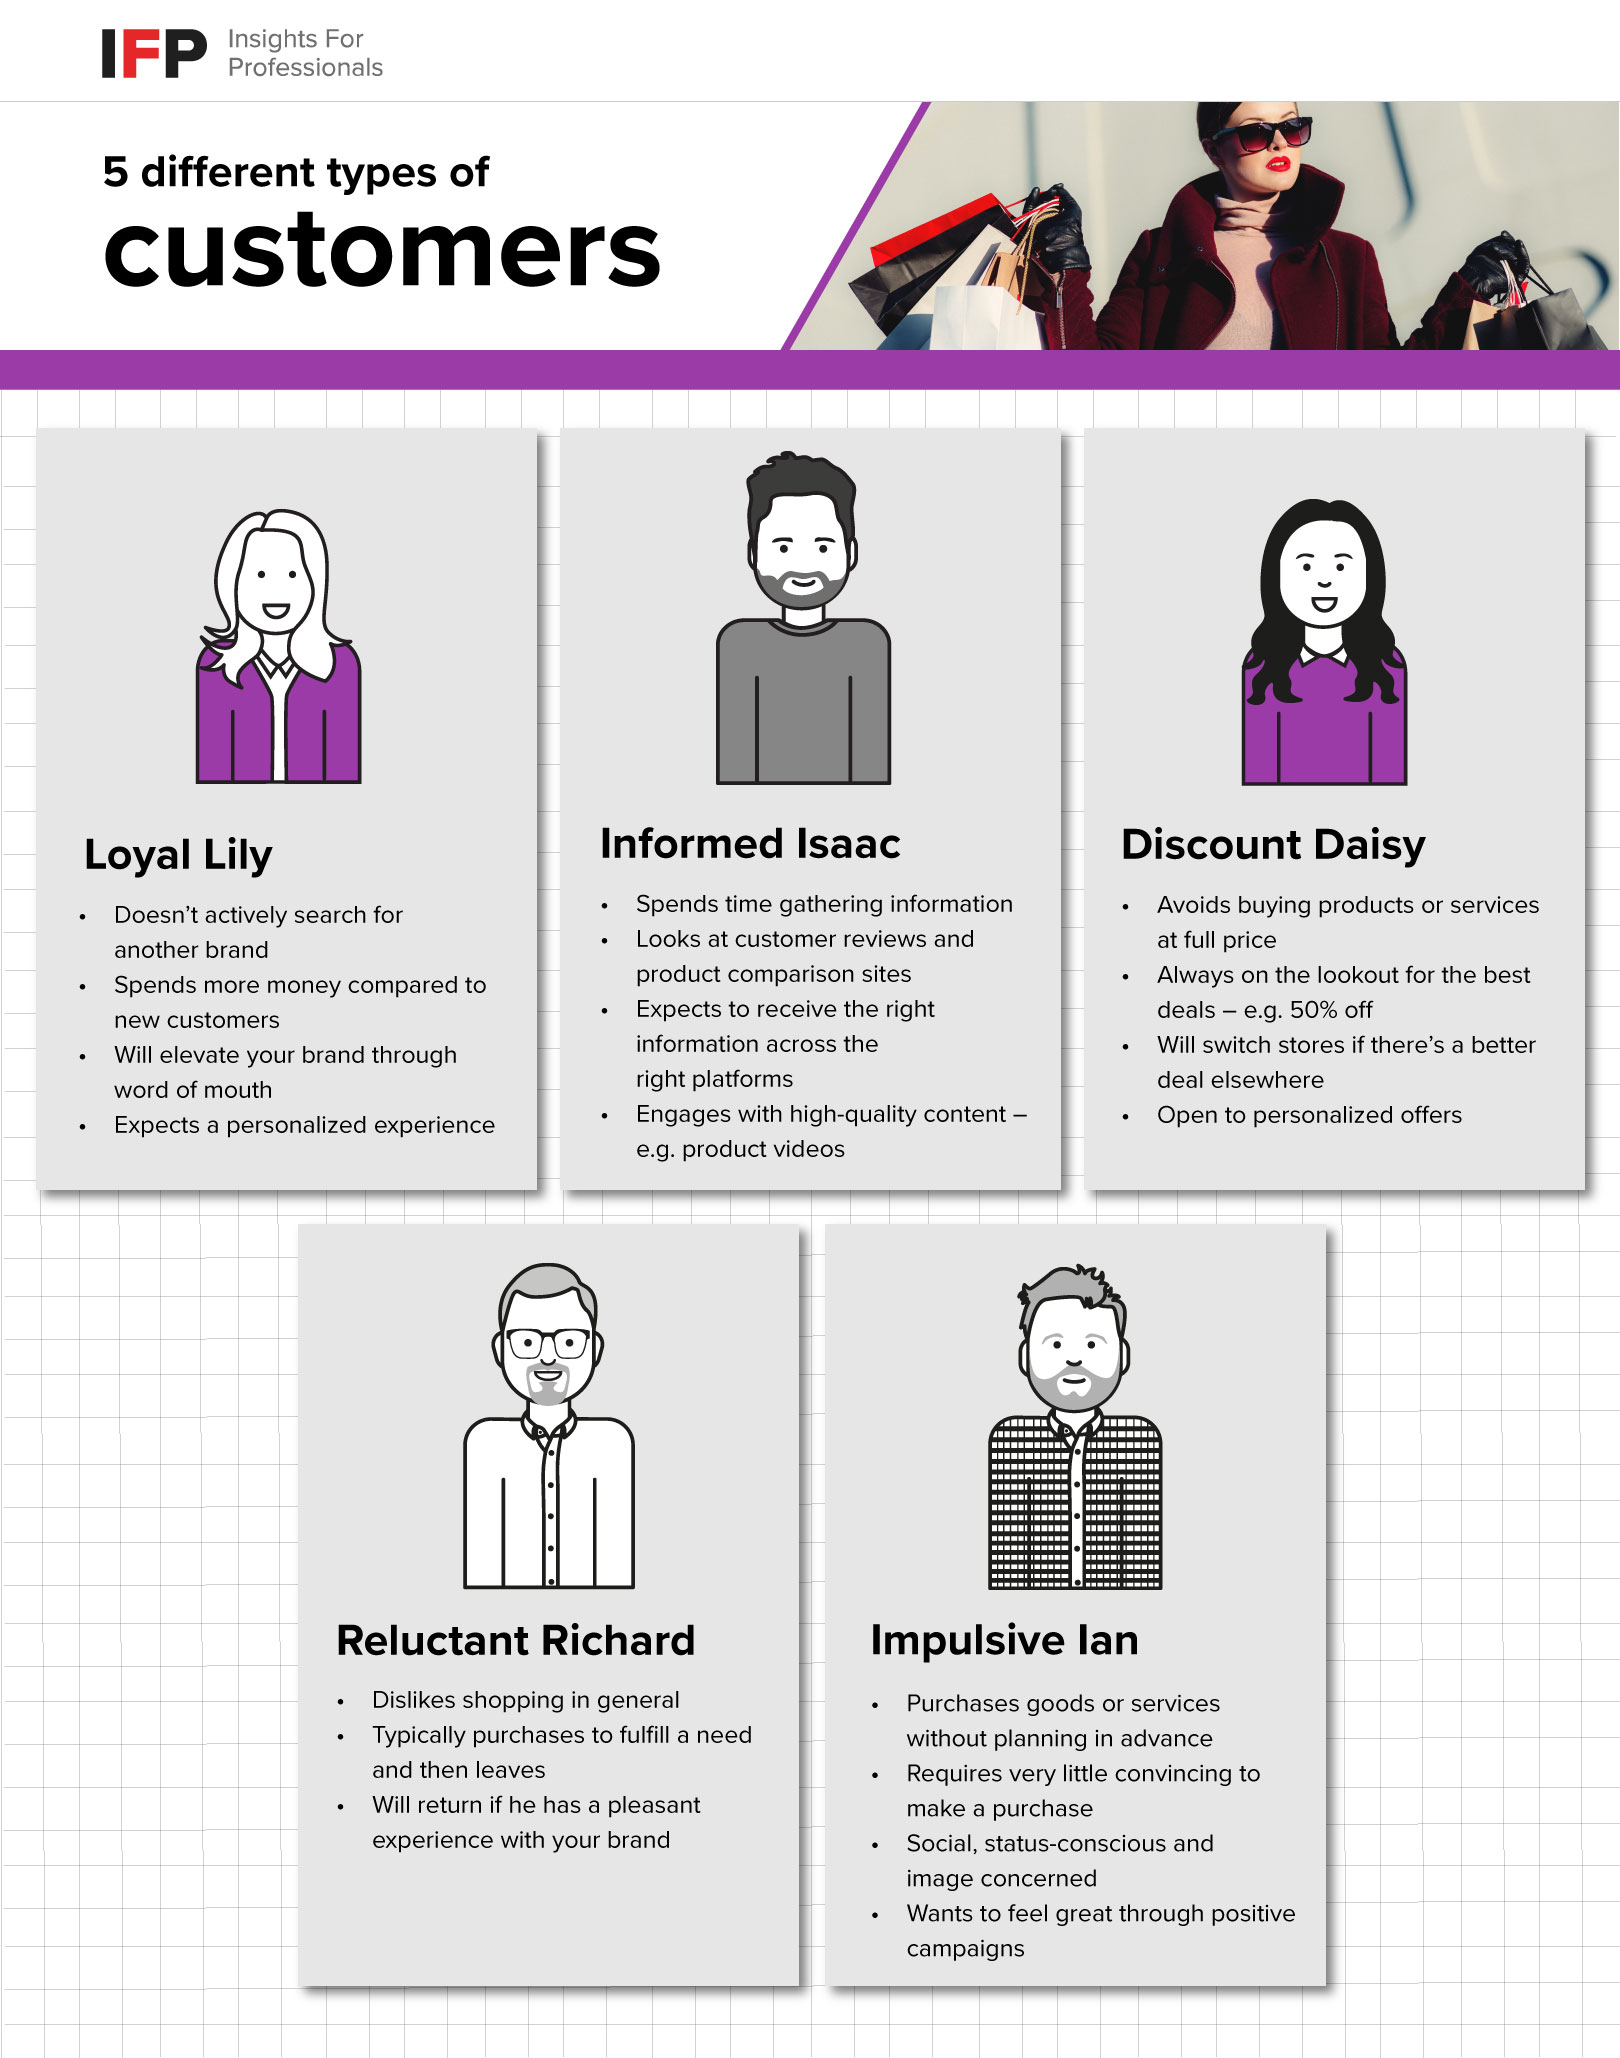 Overview of the different types of customers and their traits